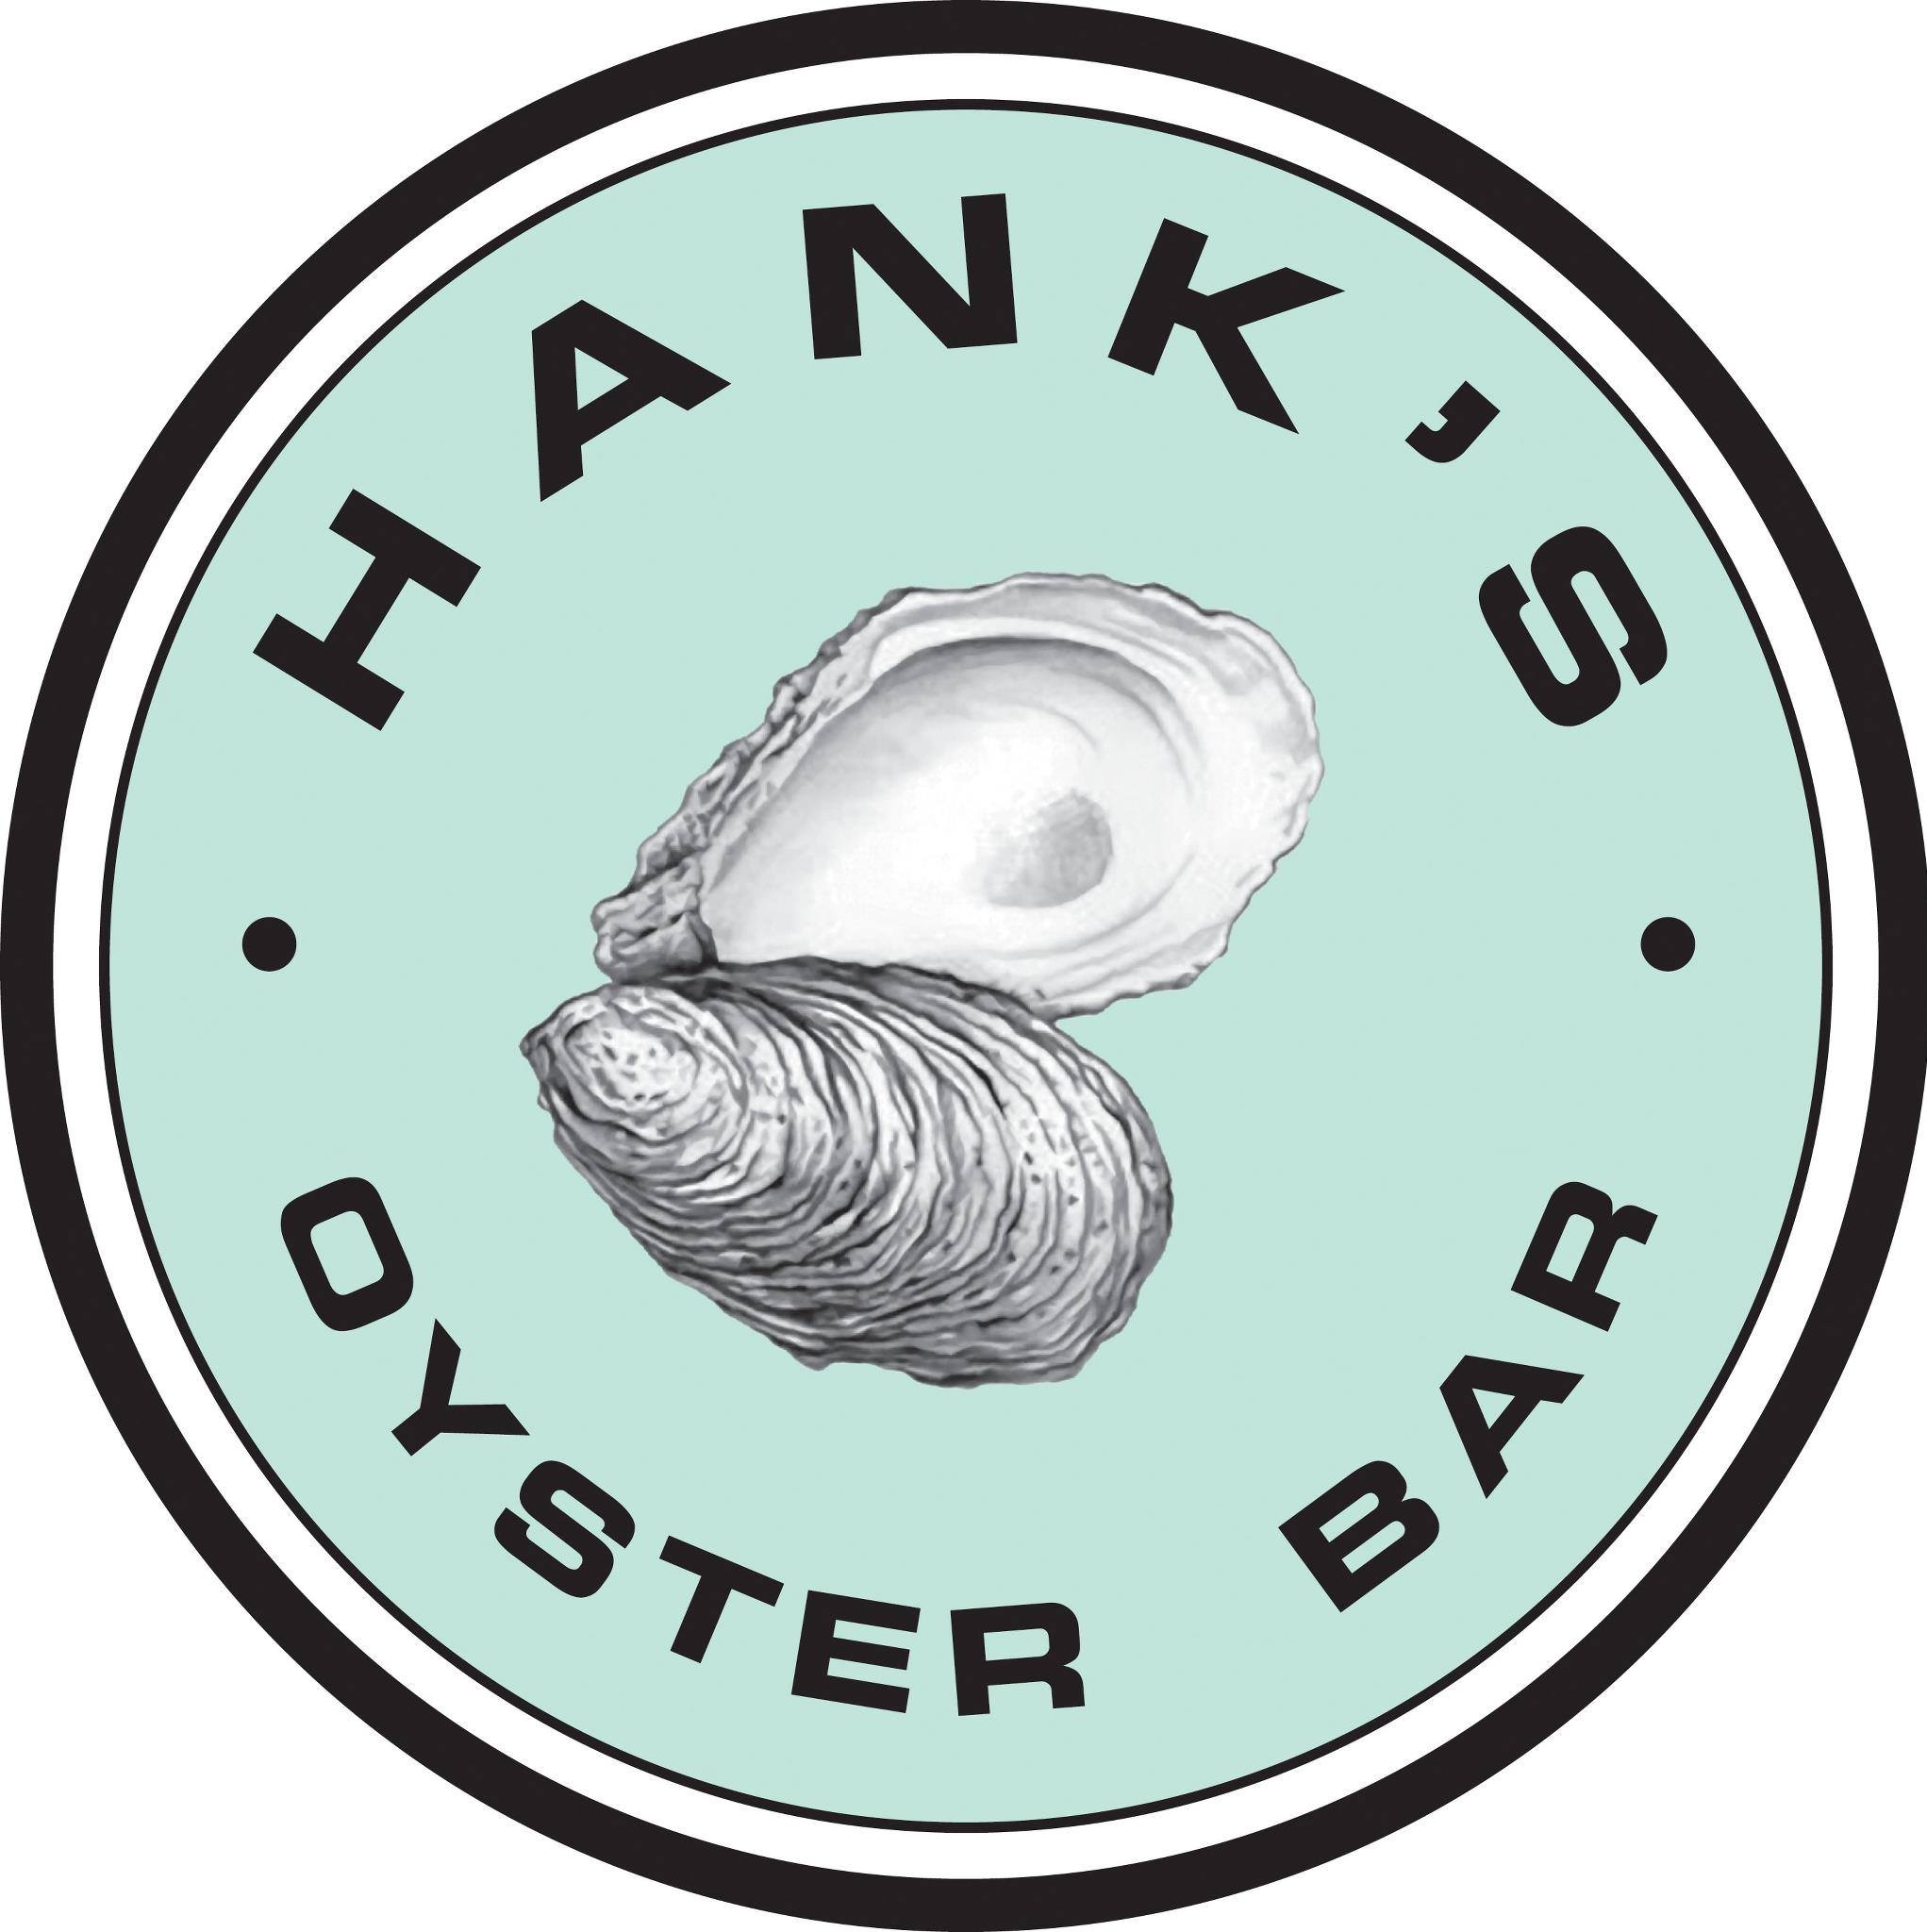 Hank's Oyster Bar - Old Town